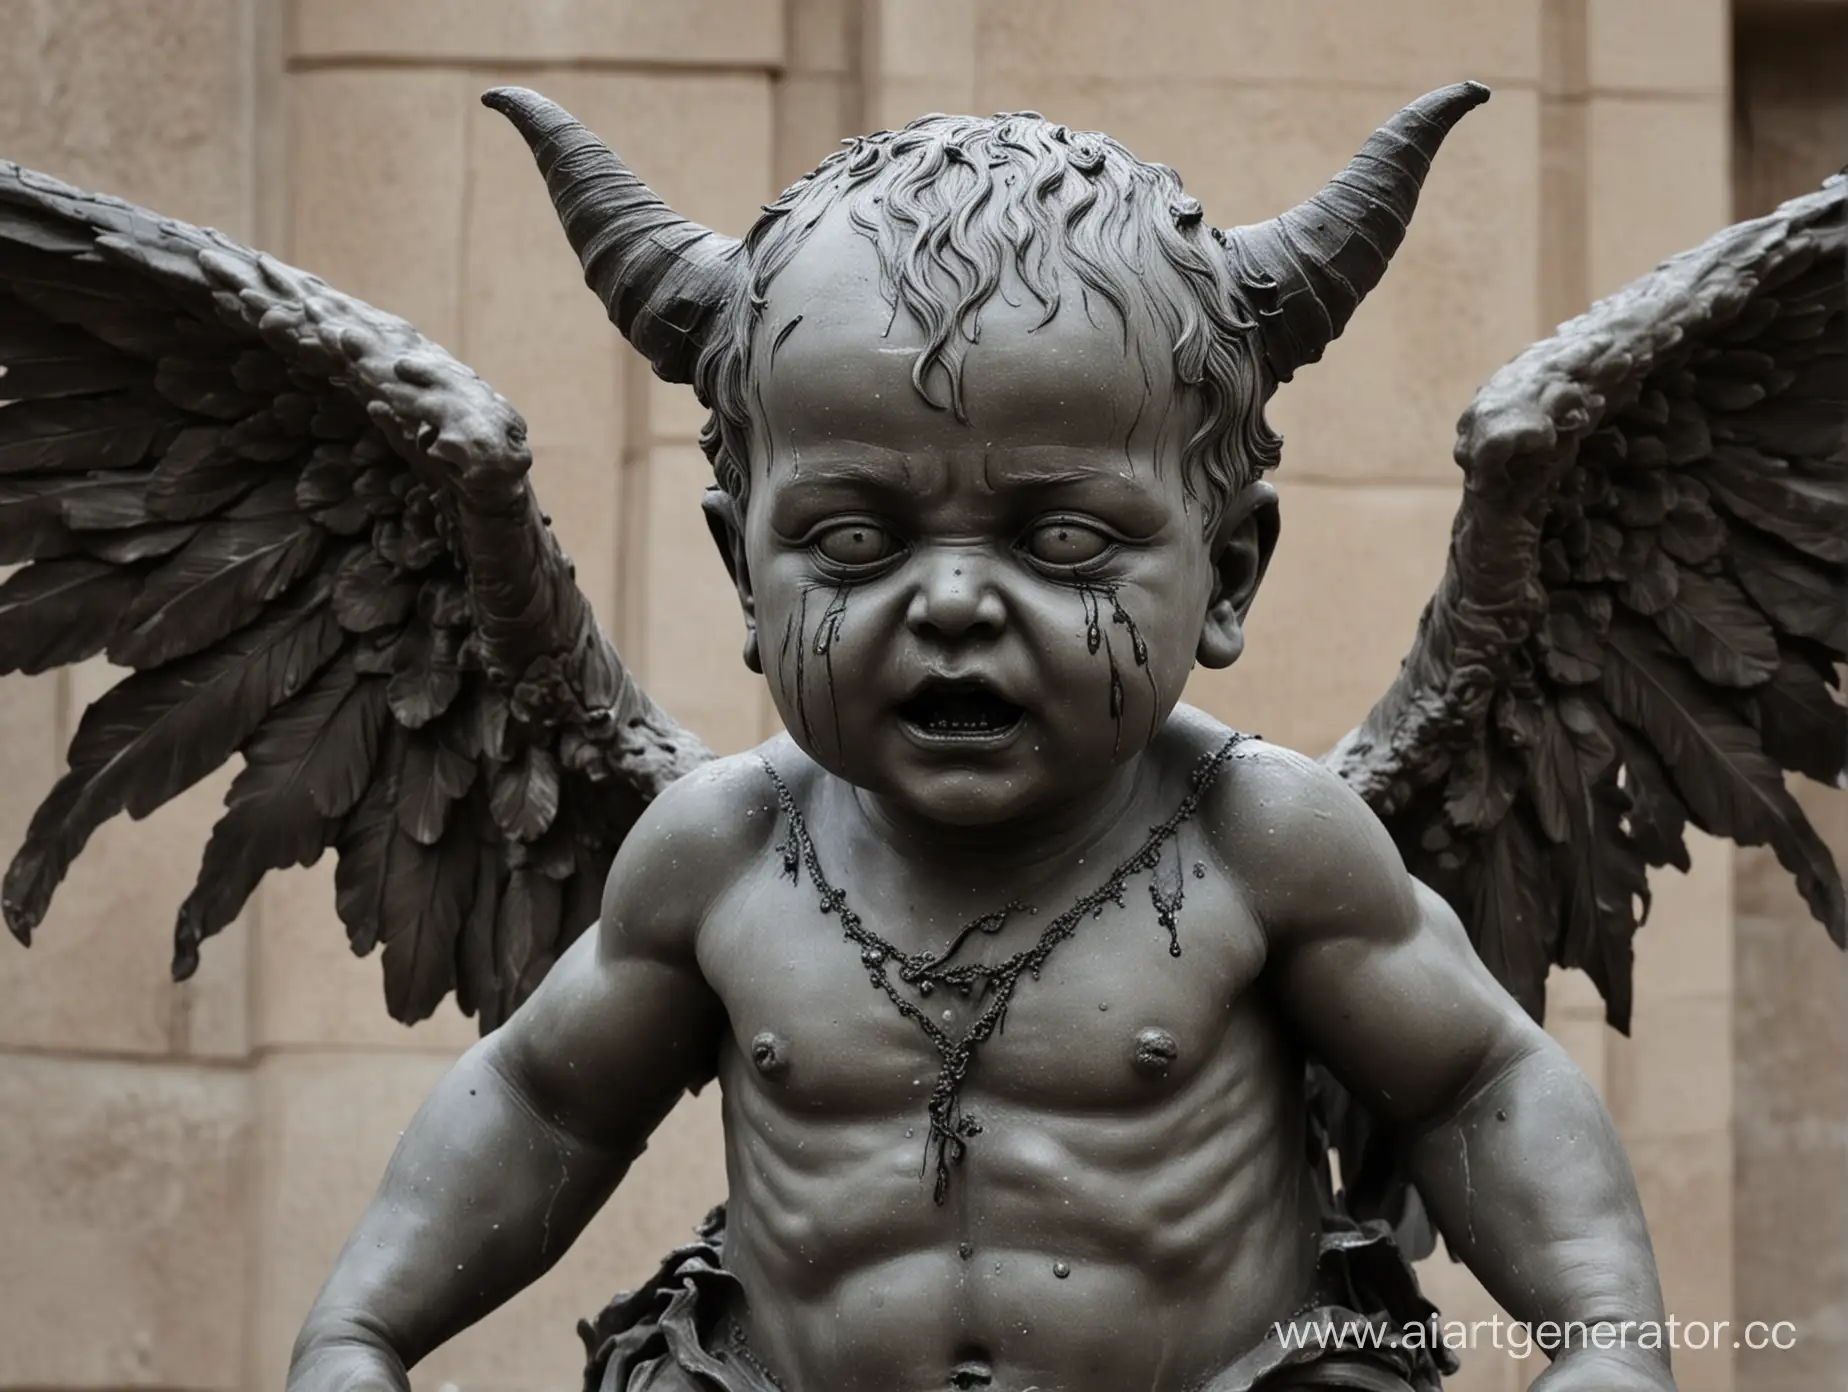 Terrifying-Sculpture-Winged-Infant-with-Horns-and-Black-Tears